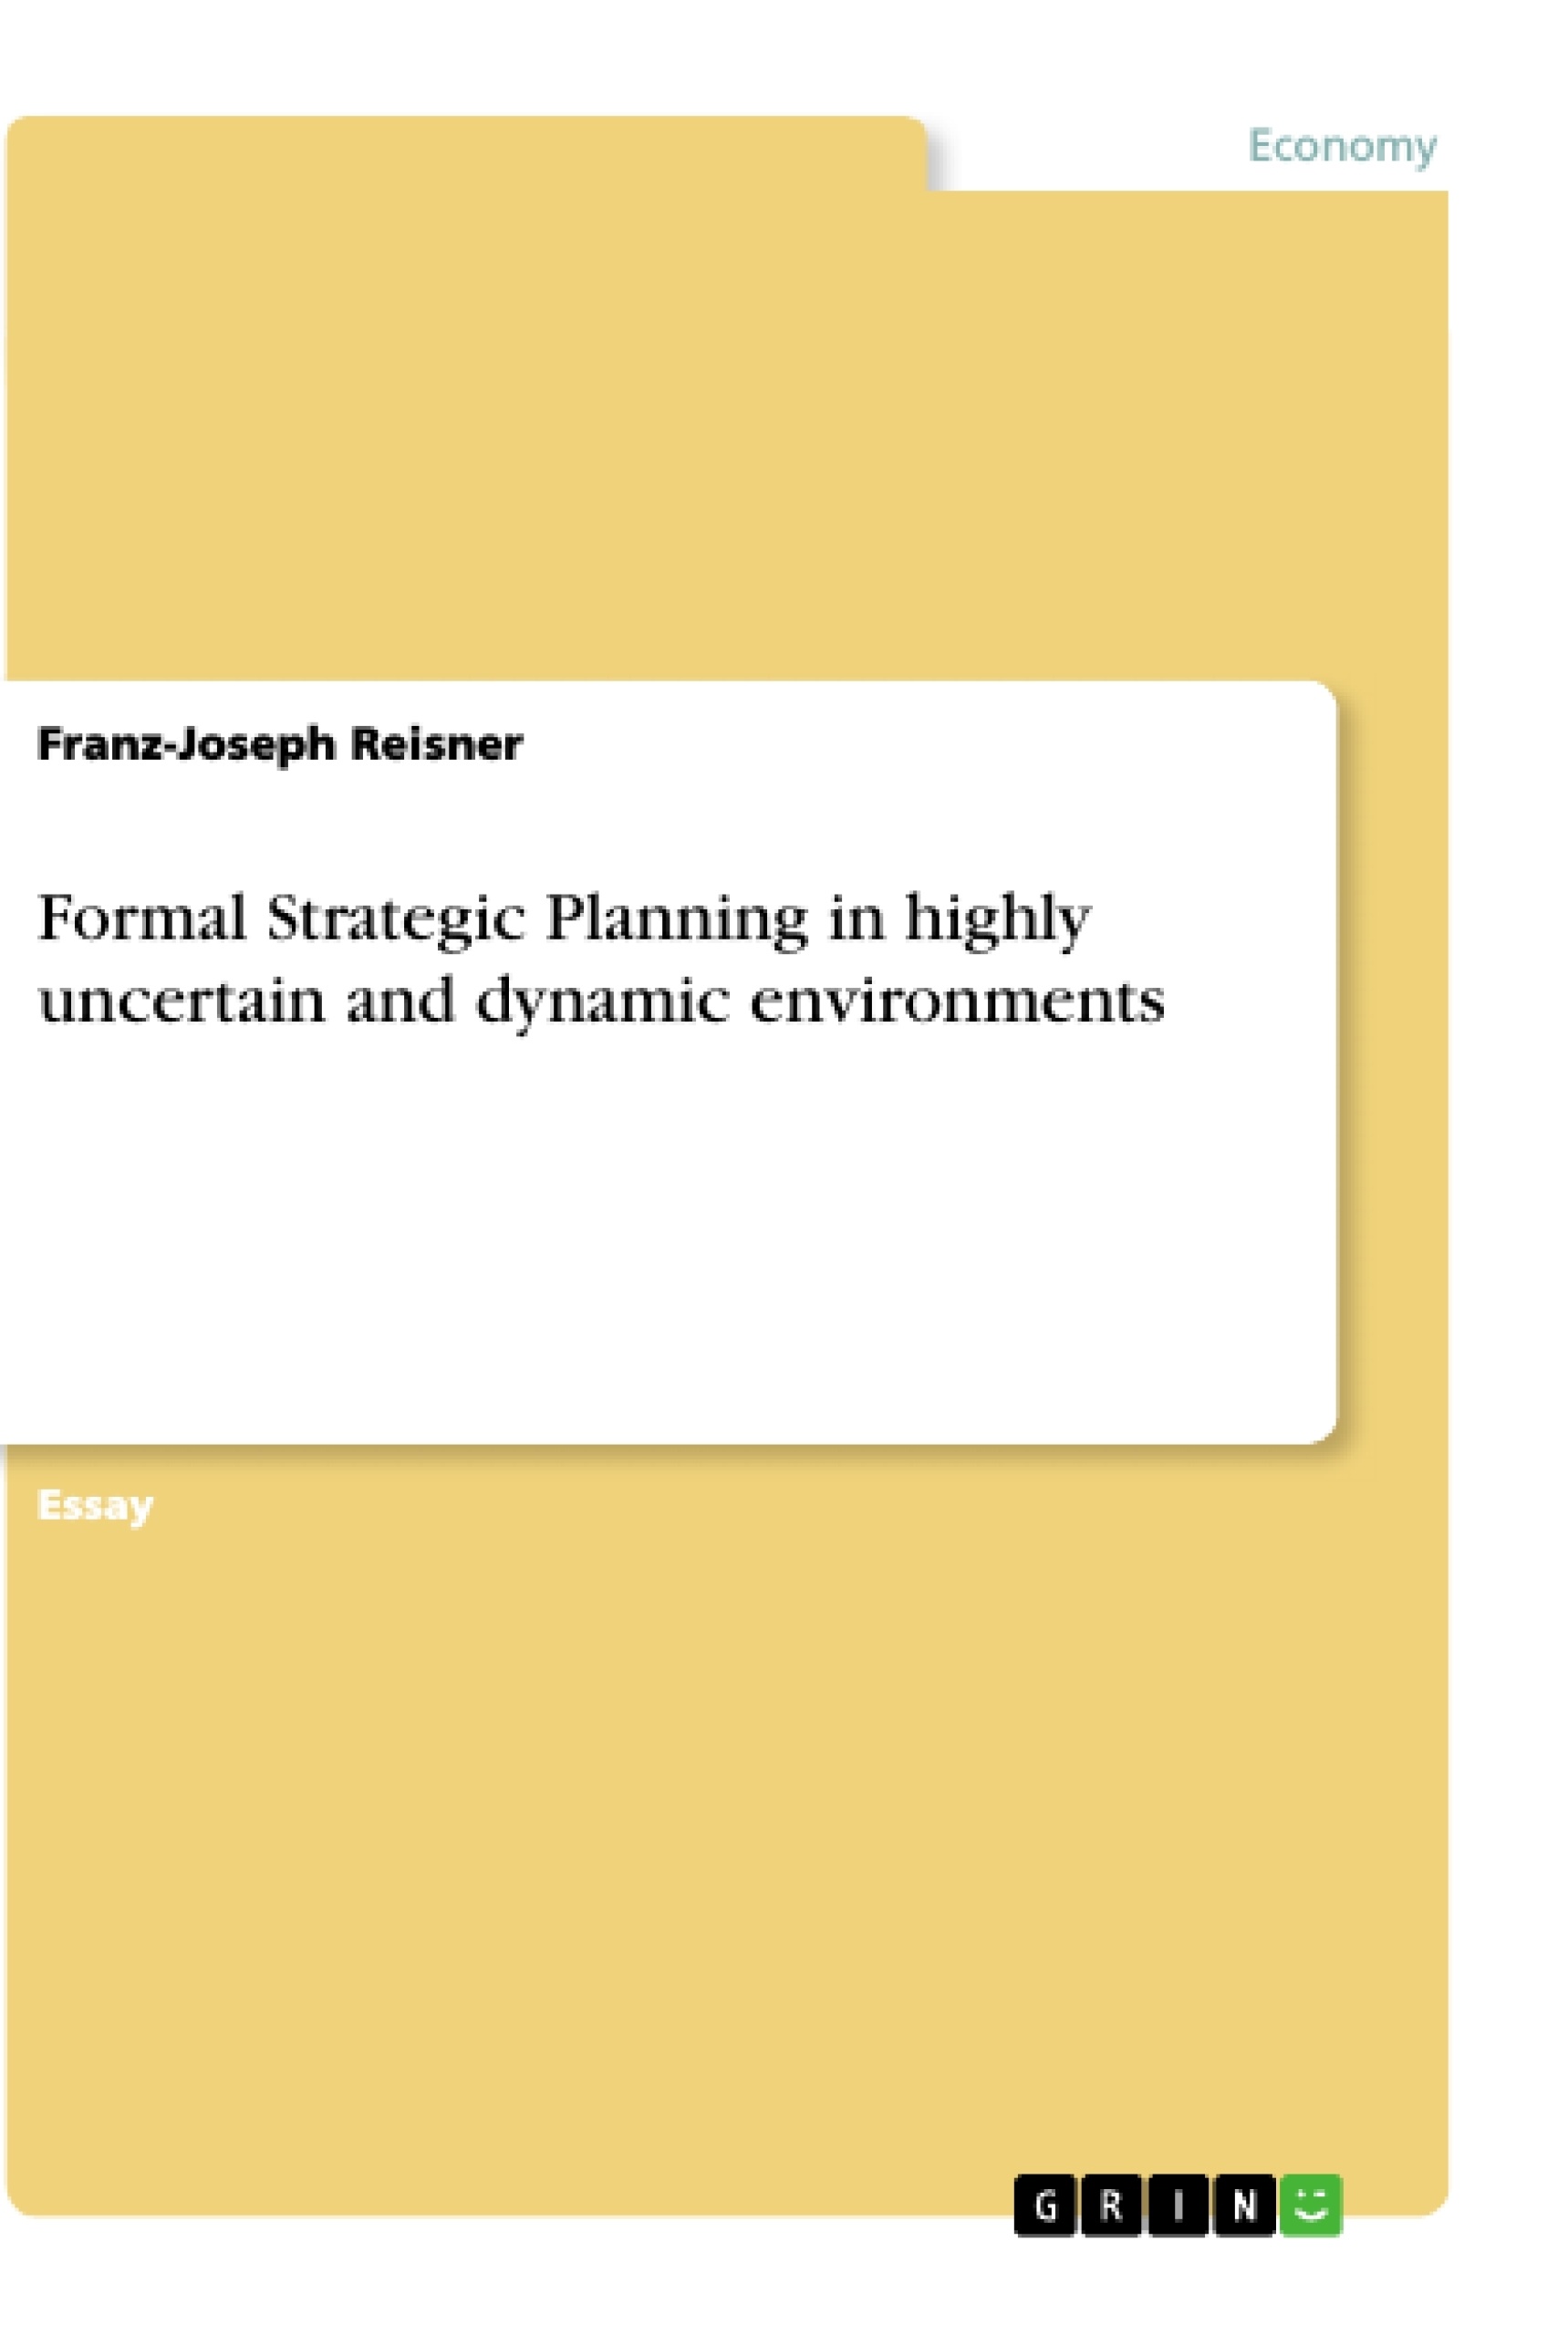 Title: Formal Strategic Planning in highly uncertain and dynamic environments